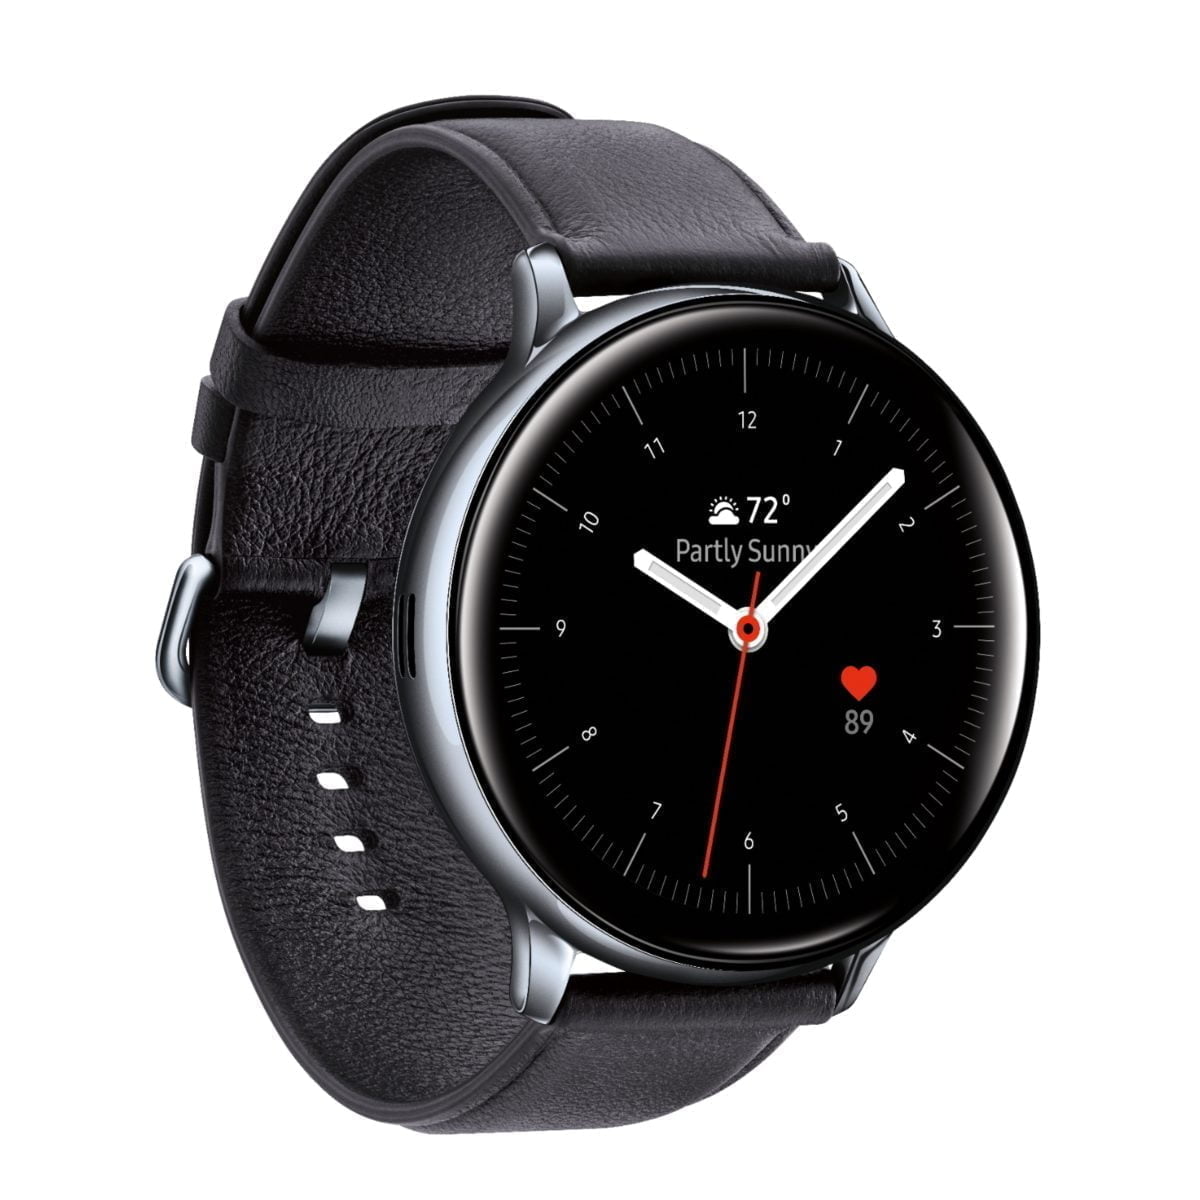 6360446 Rd Scaled Samsung &Lt;H1 Class=&Quot;Heading-5 V-Fw-Regular&Quot;&Gt;Samsung - Galaxy Watch Active2 Smartwatch 44Mm Aluminum - Silver &Lt;Strong&Gt;Model&Lt;/Strong&Gt;: Sm-R825Ussaxar&Lt;/H1&Gt; Https://Www.youtube.com/Watch?V=Cu0-Lhyhgu4 &Lt;Div Class=&Quot;Long-Description-Container Body-Copy &Quot;&Gt; &Lt;Div Class=&Quot;Html-Fragment&Quot;&Gt; &Lt;Div&Gt; &Lt;Div&Gt;Enhance Your Sporting Performance With This Samsung Galaxy Watch Active2 Bluetooth Smartwatch. Monitor Your Workouts And Receive Detailed Reports On Your Performance Even As The Running Coach Feature Gives You Important Insight In Real-Time. This Samsung Galaxy Watch Active2 Bluetooth Smartwatch Analyses Your Sleep Pattern And Offers Helpful Advice On How To Improve It.&Lt;/Div&Gt; &Lt;/Div&Gt; &Lt;/Div&Gt; &Lt;/Div&Gt; Samsung Galaxy Watch Active2 Samsung Galaxy Watch Active2 Smartwatch 44Mm Aluminum - Silver